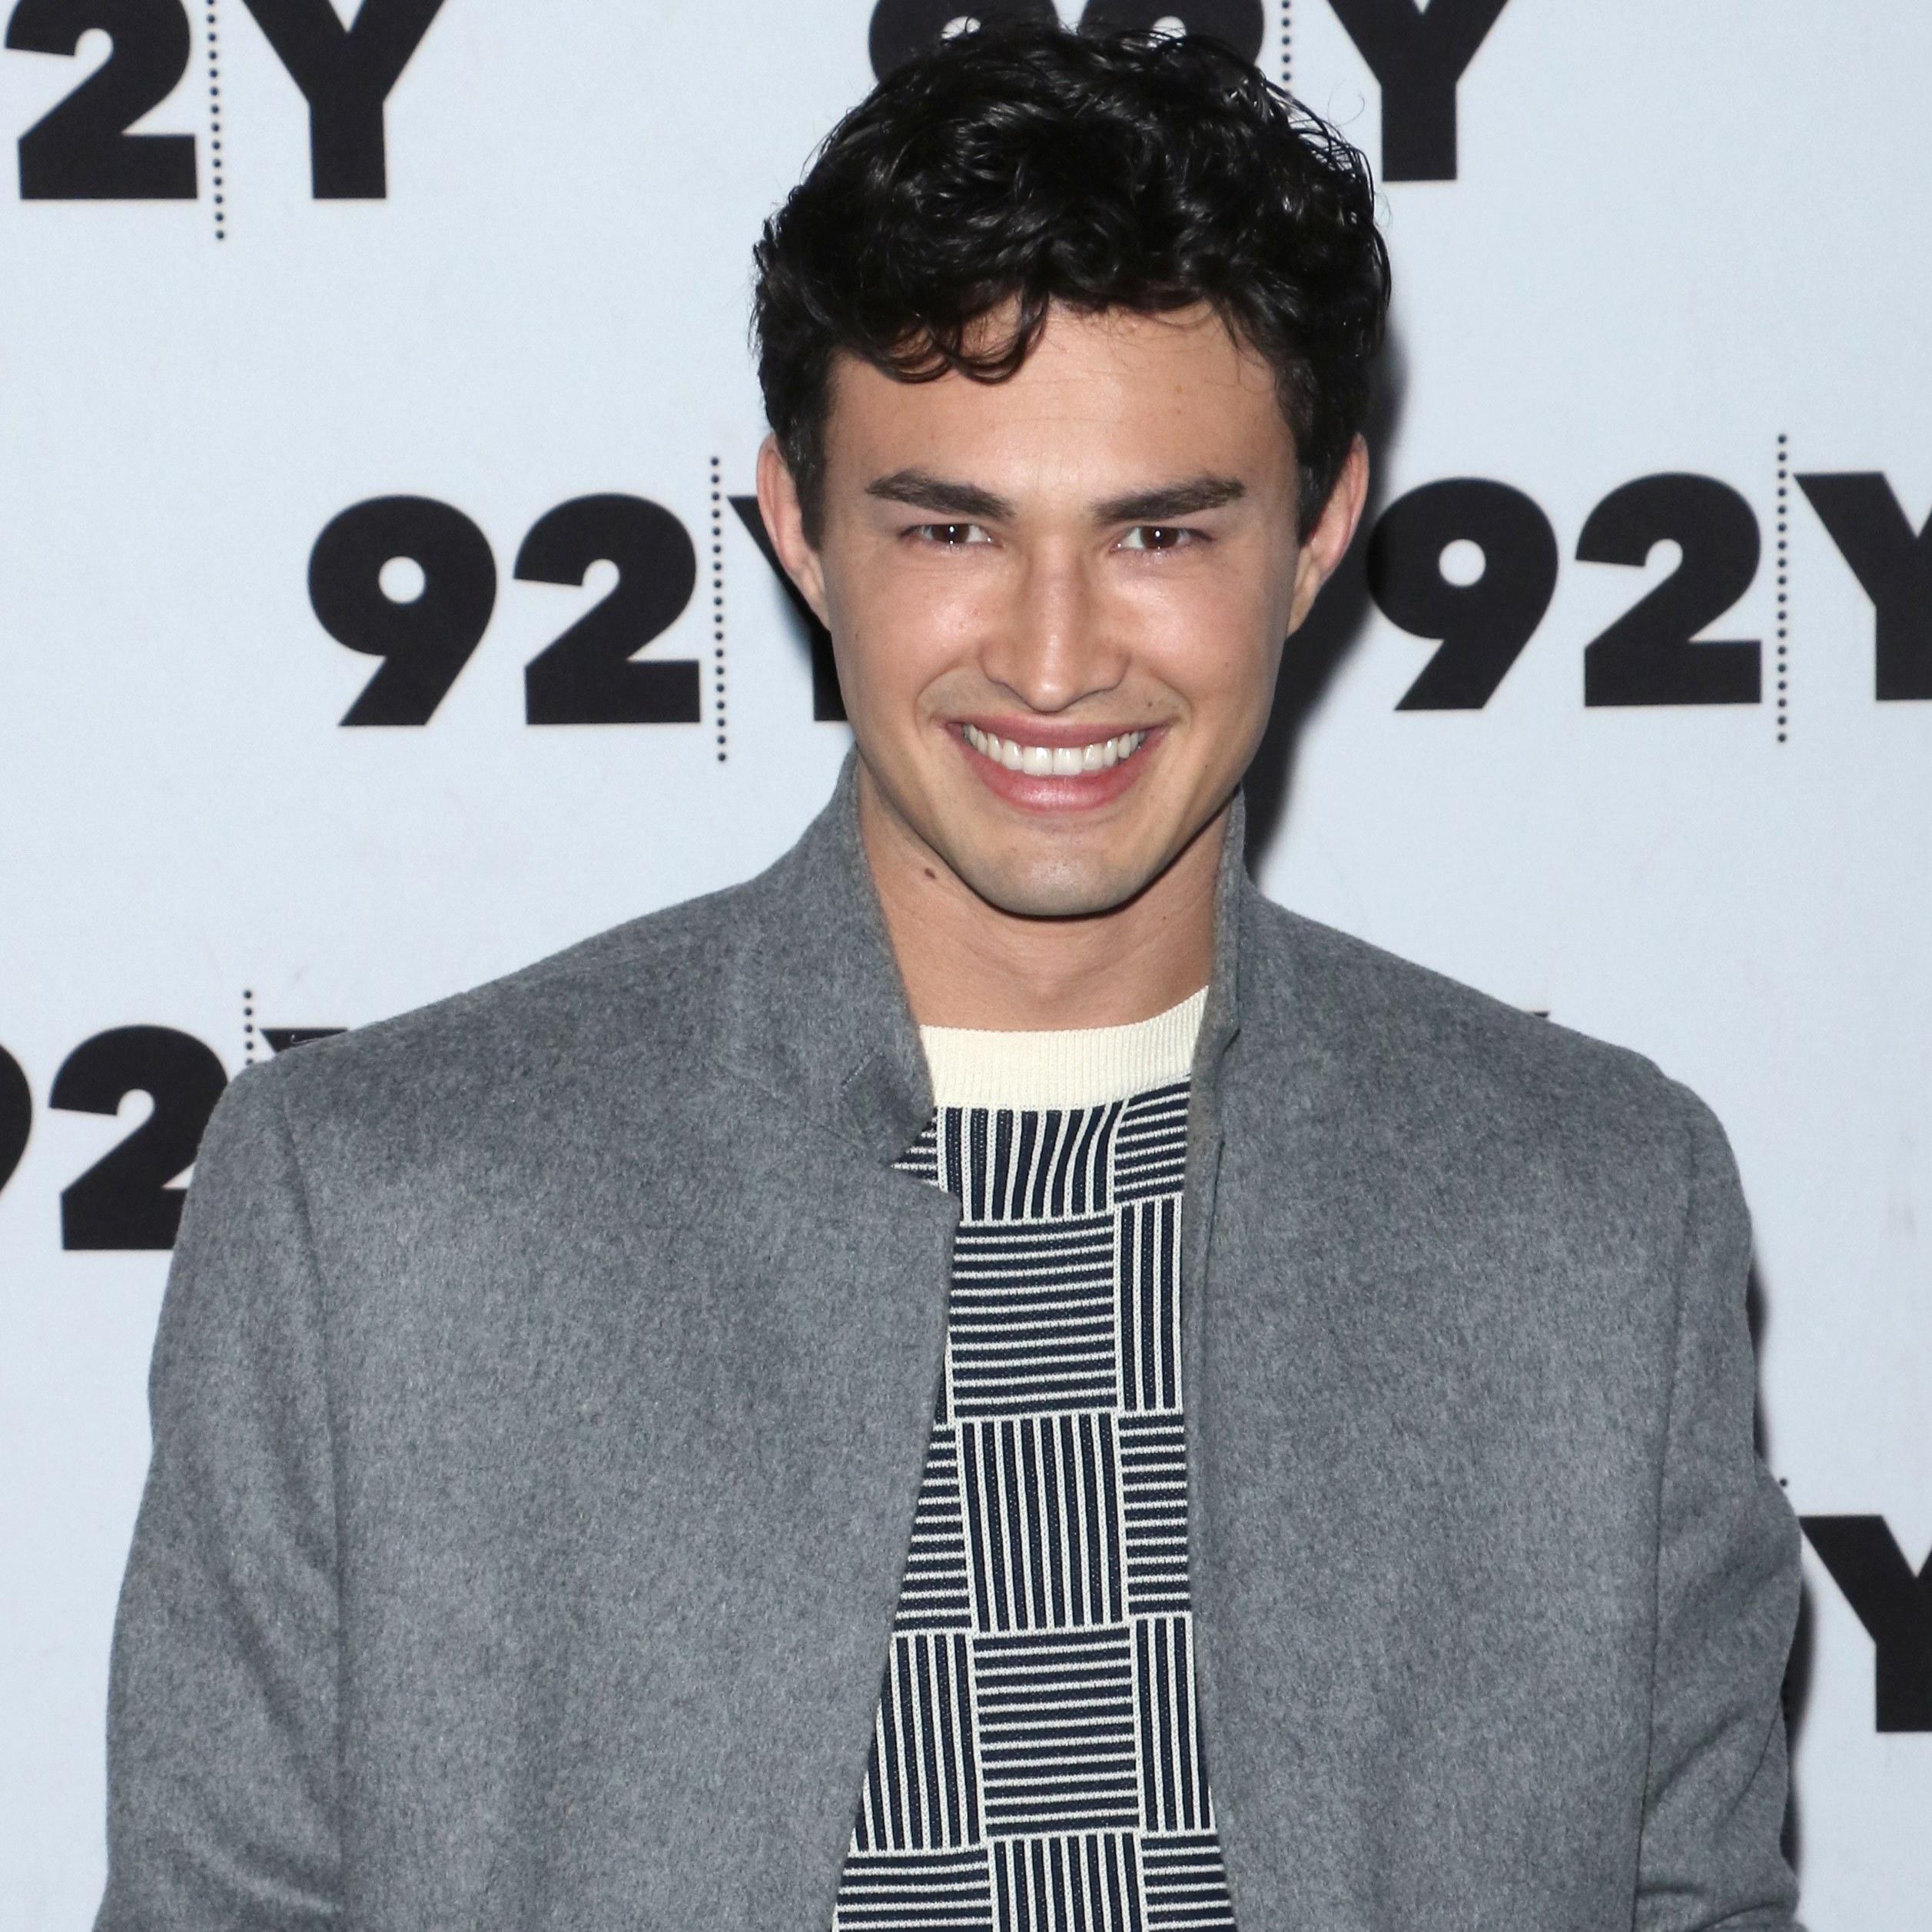 Chilling Adventures of Sabrina Star Gavin Leatherwood Hinted He